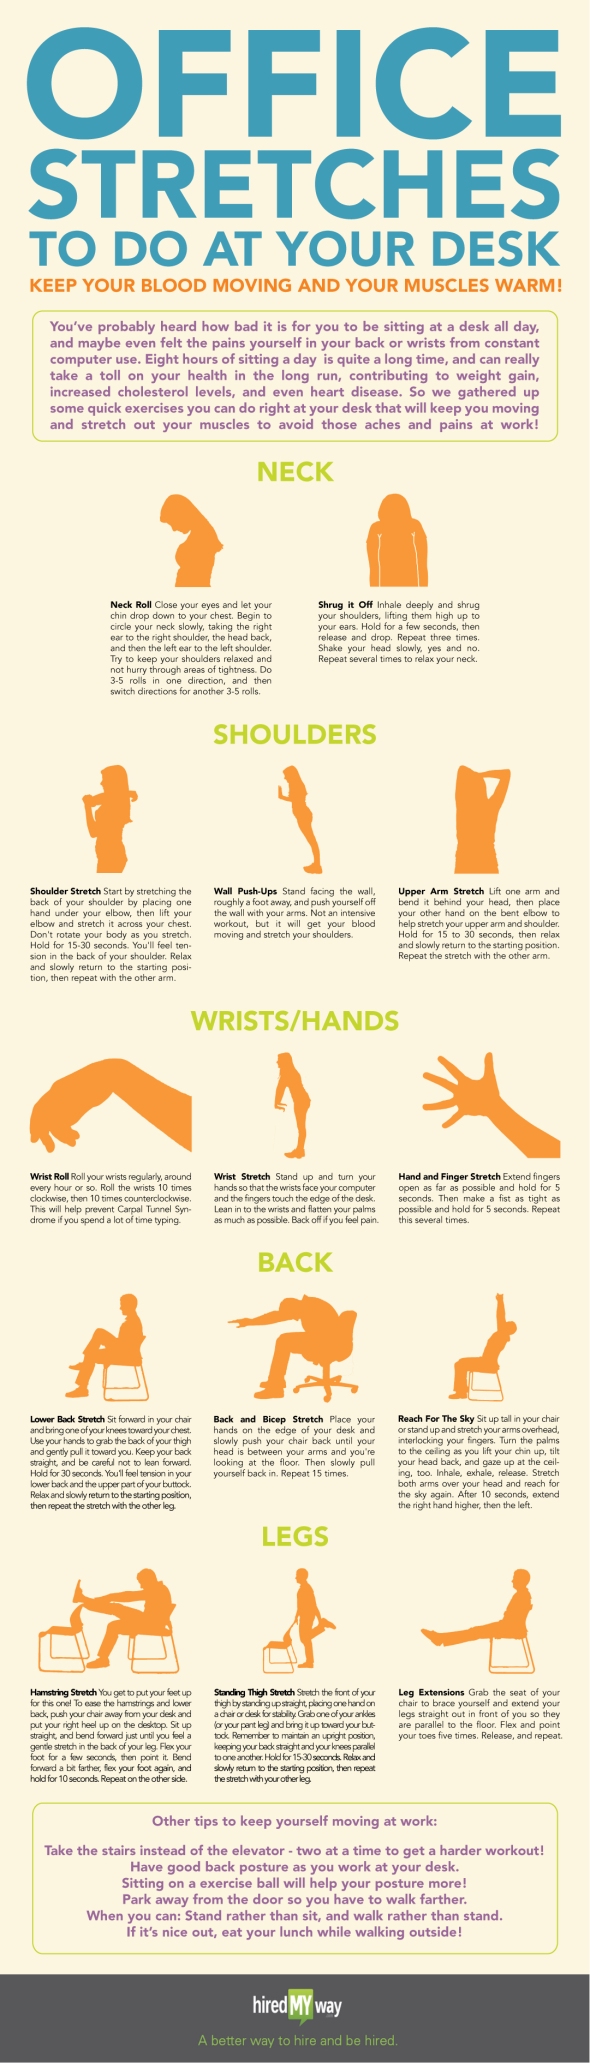 office_stretches-infographic